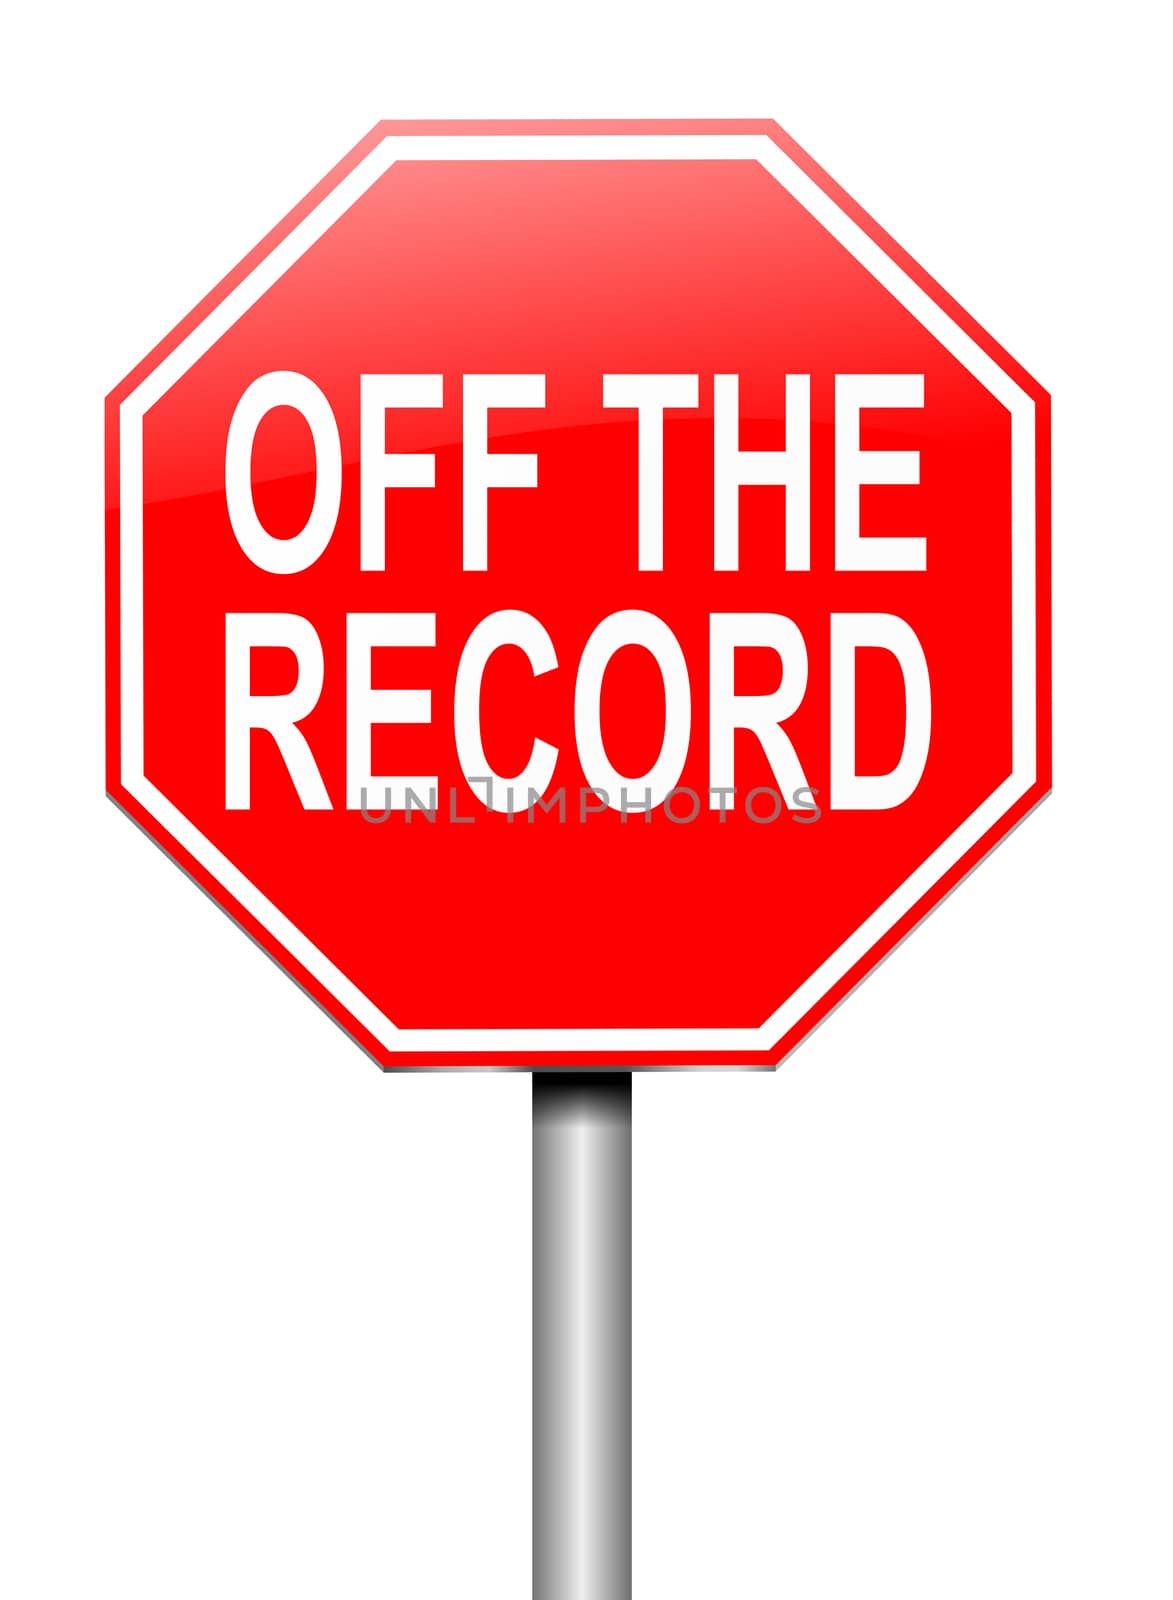 Illustration depicting a sign with an off the record concept.